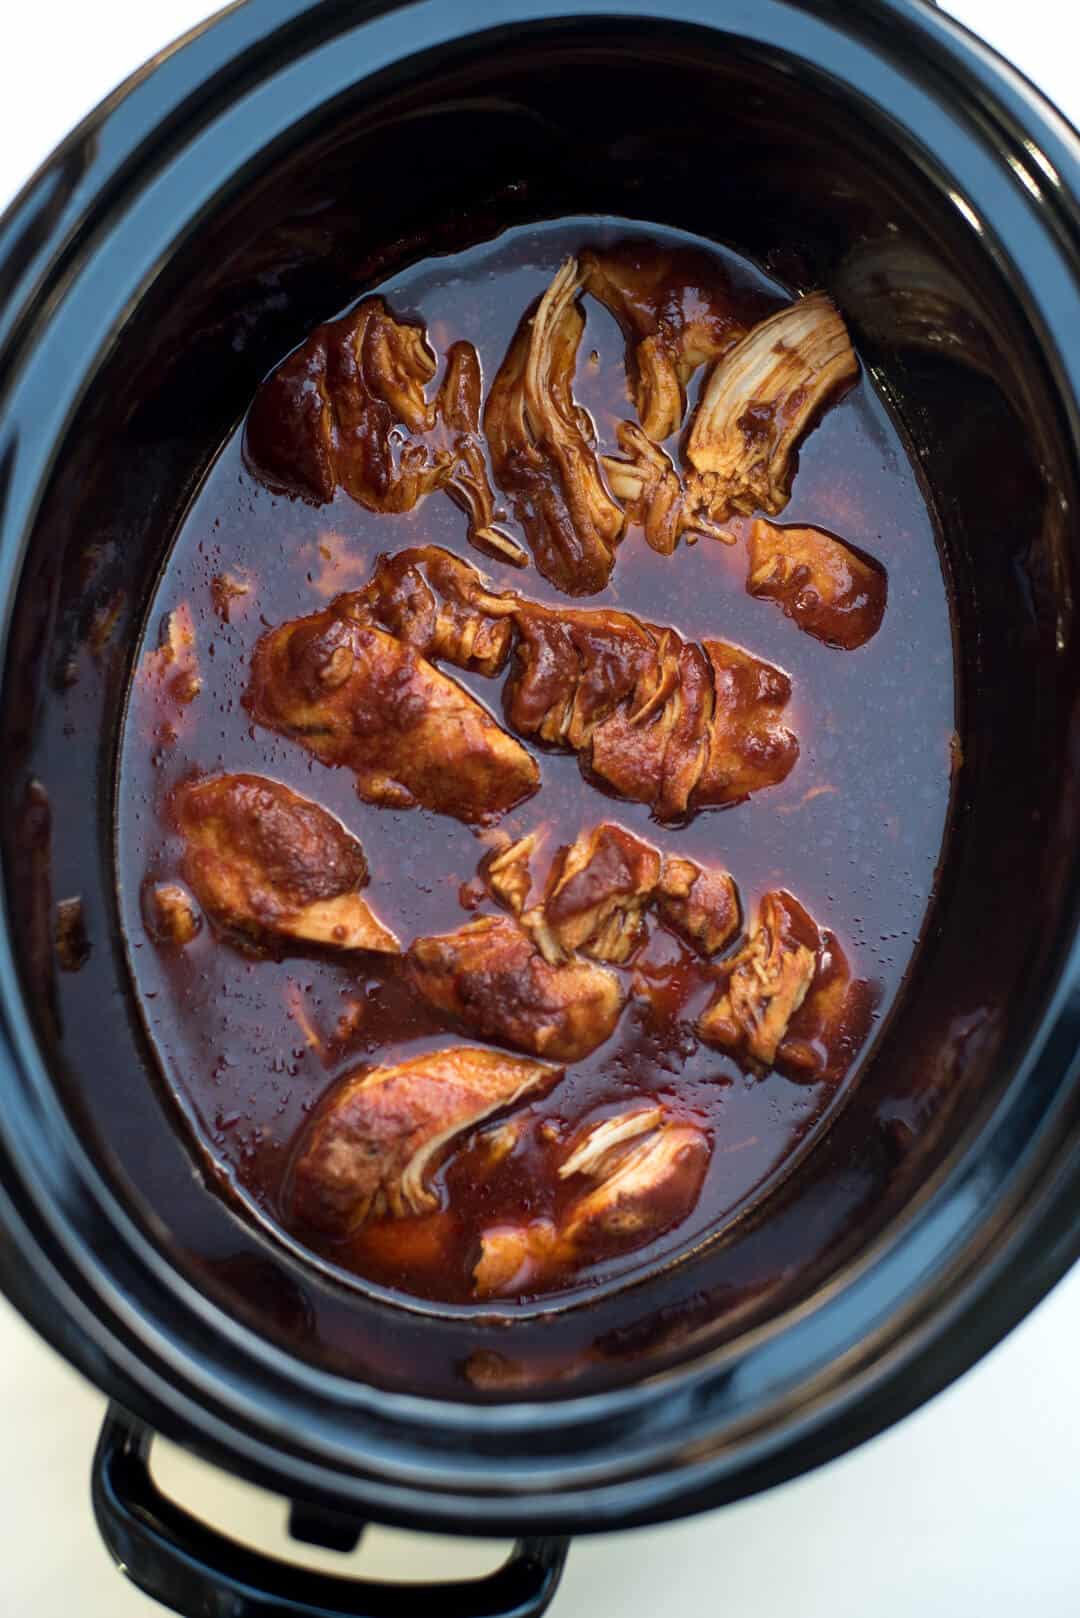 The tender chicken after it has cooked in the slow cooker.